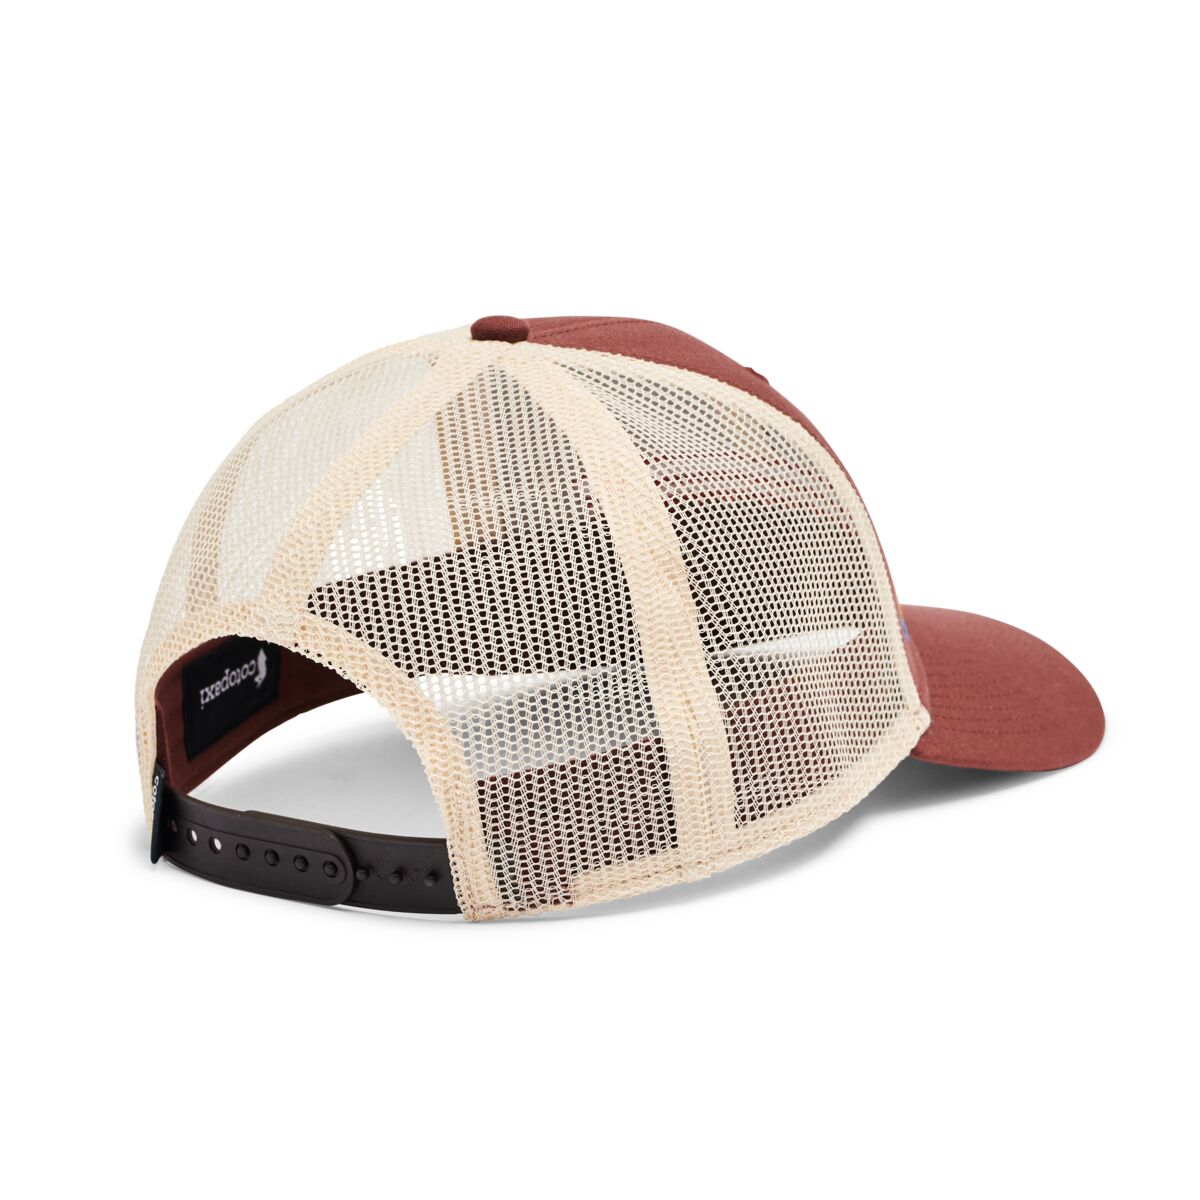 Cotopaxi On the Horizon Trucker Hat - 100% recycled polyester Chestnut Headwear